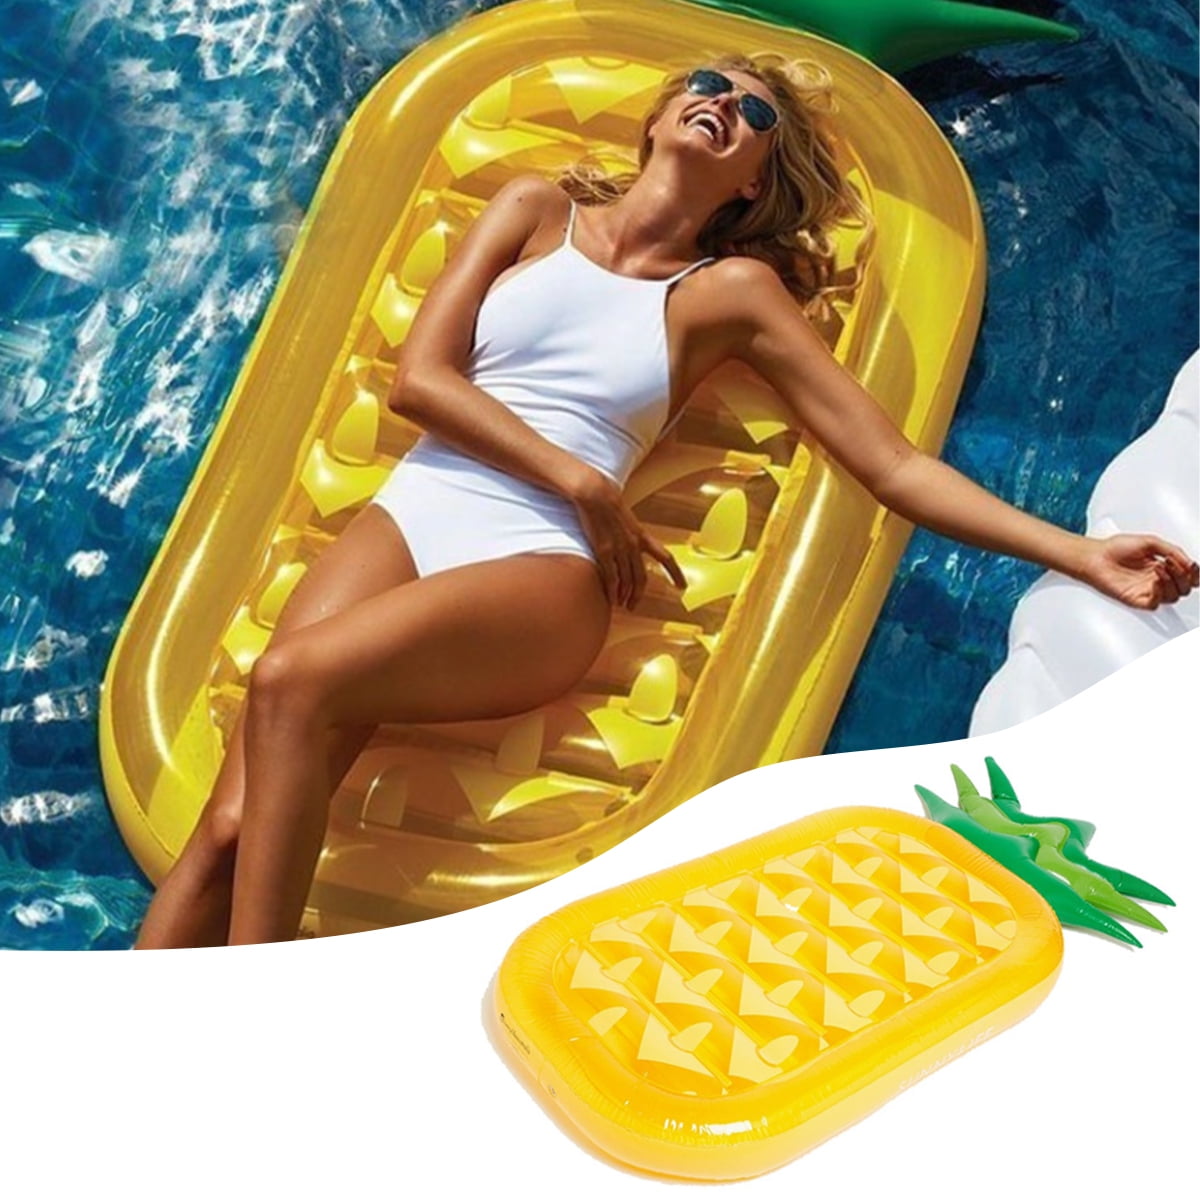 Kids Backyard Teens Floating Intex Basketball Game Hoops Pool Floats Family For Adults Outdoor Swimming Pool Floaty Lounger Party Floatie Swim Rings Backyard Beach Lake Float Toys Hoops 